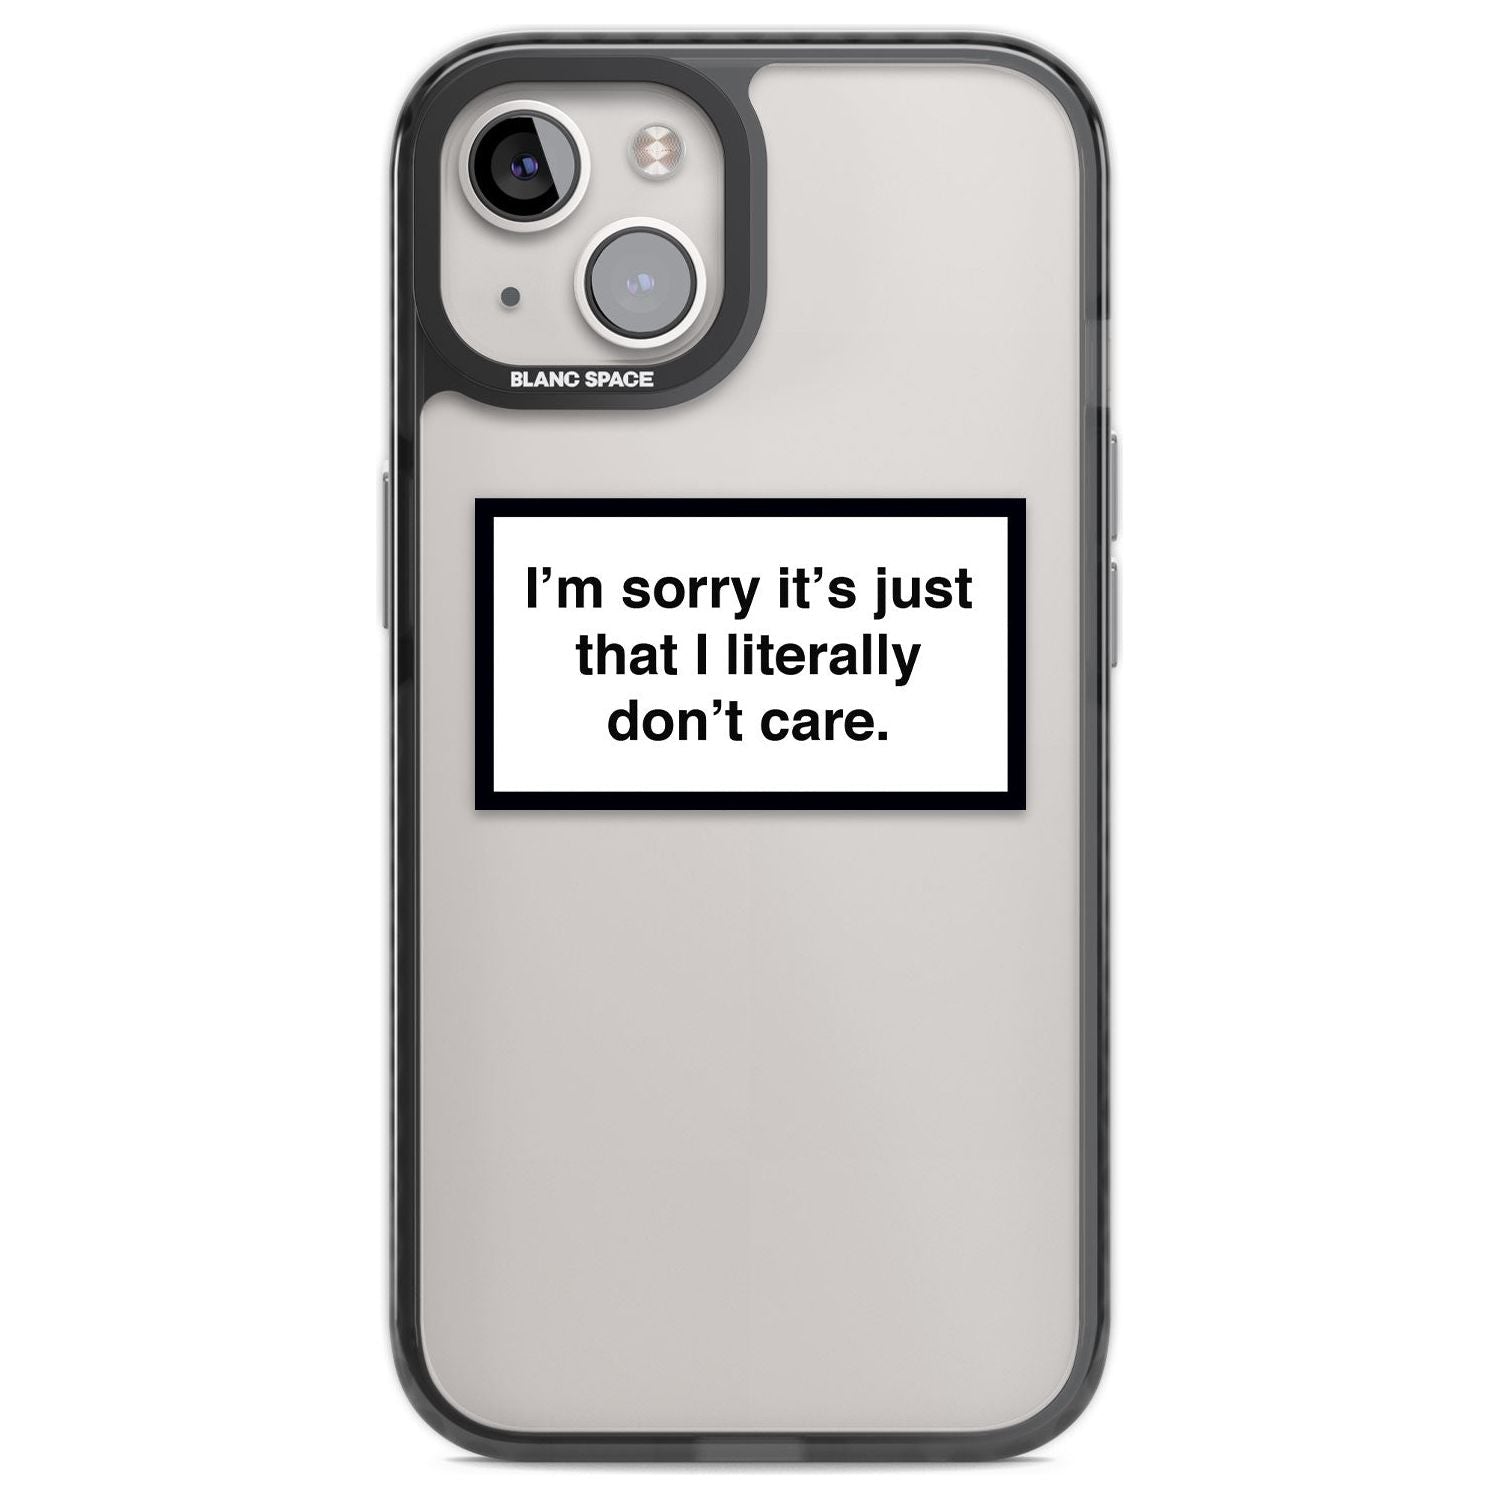 I Literally Don't Care Phone Case iPhone 12 / Black Impact Case,iPhone 13 / Black Impact Case,iPhone 12 Pro / Black Impact Case,iPhone 14 / Black Impact Case,iPhone 15 Plus / Black Impact Case,iPhone 15 / Black Impact Case Blanc Space